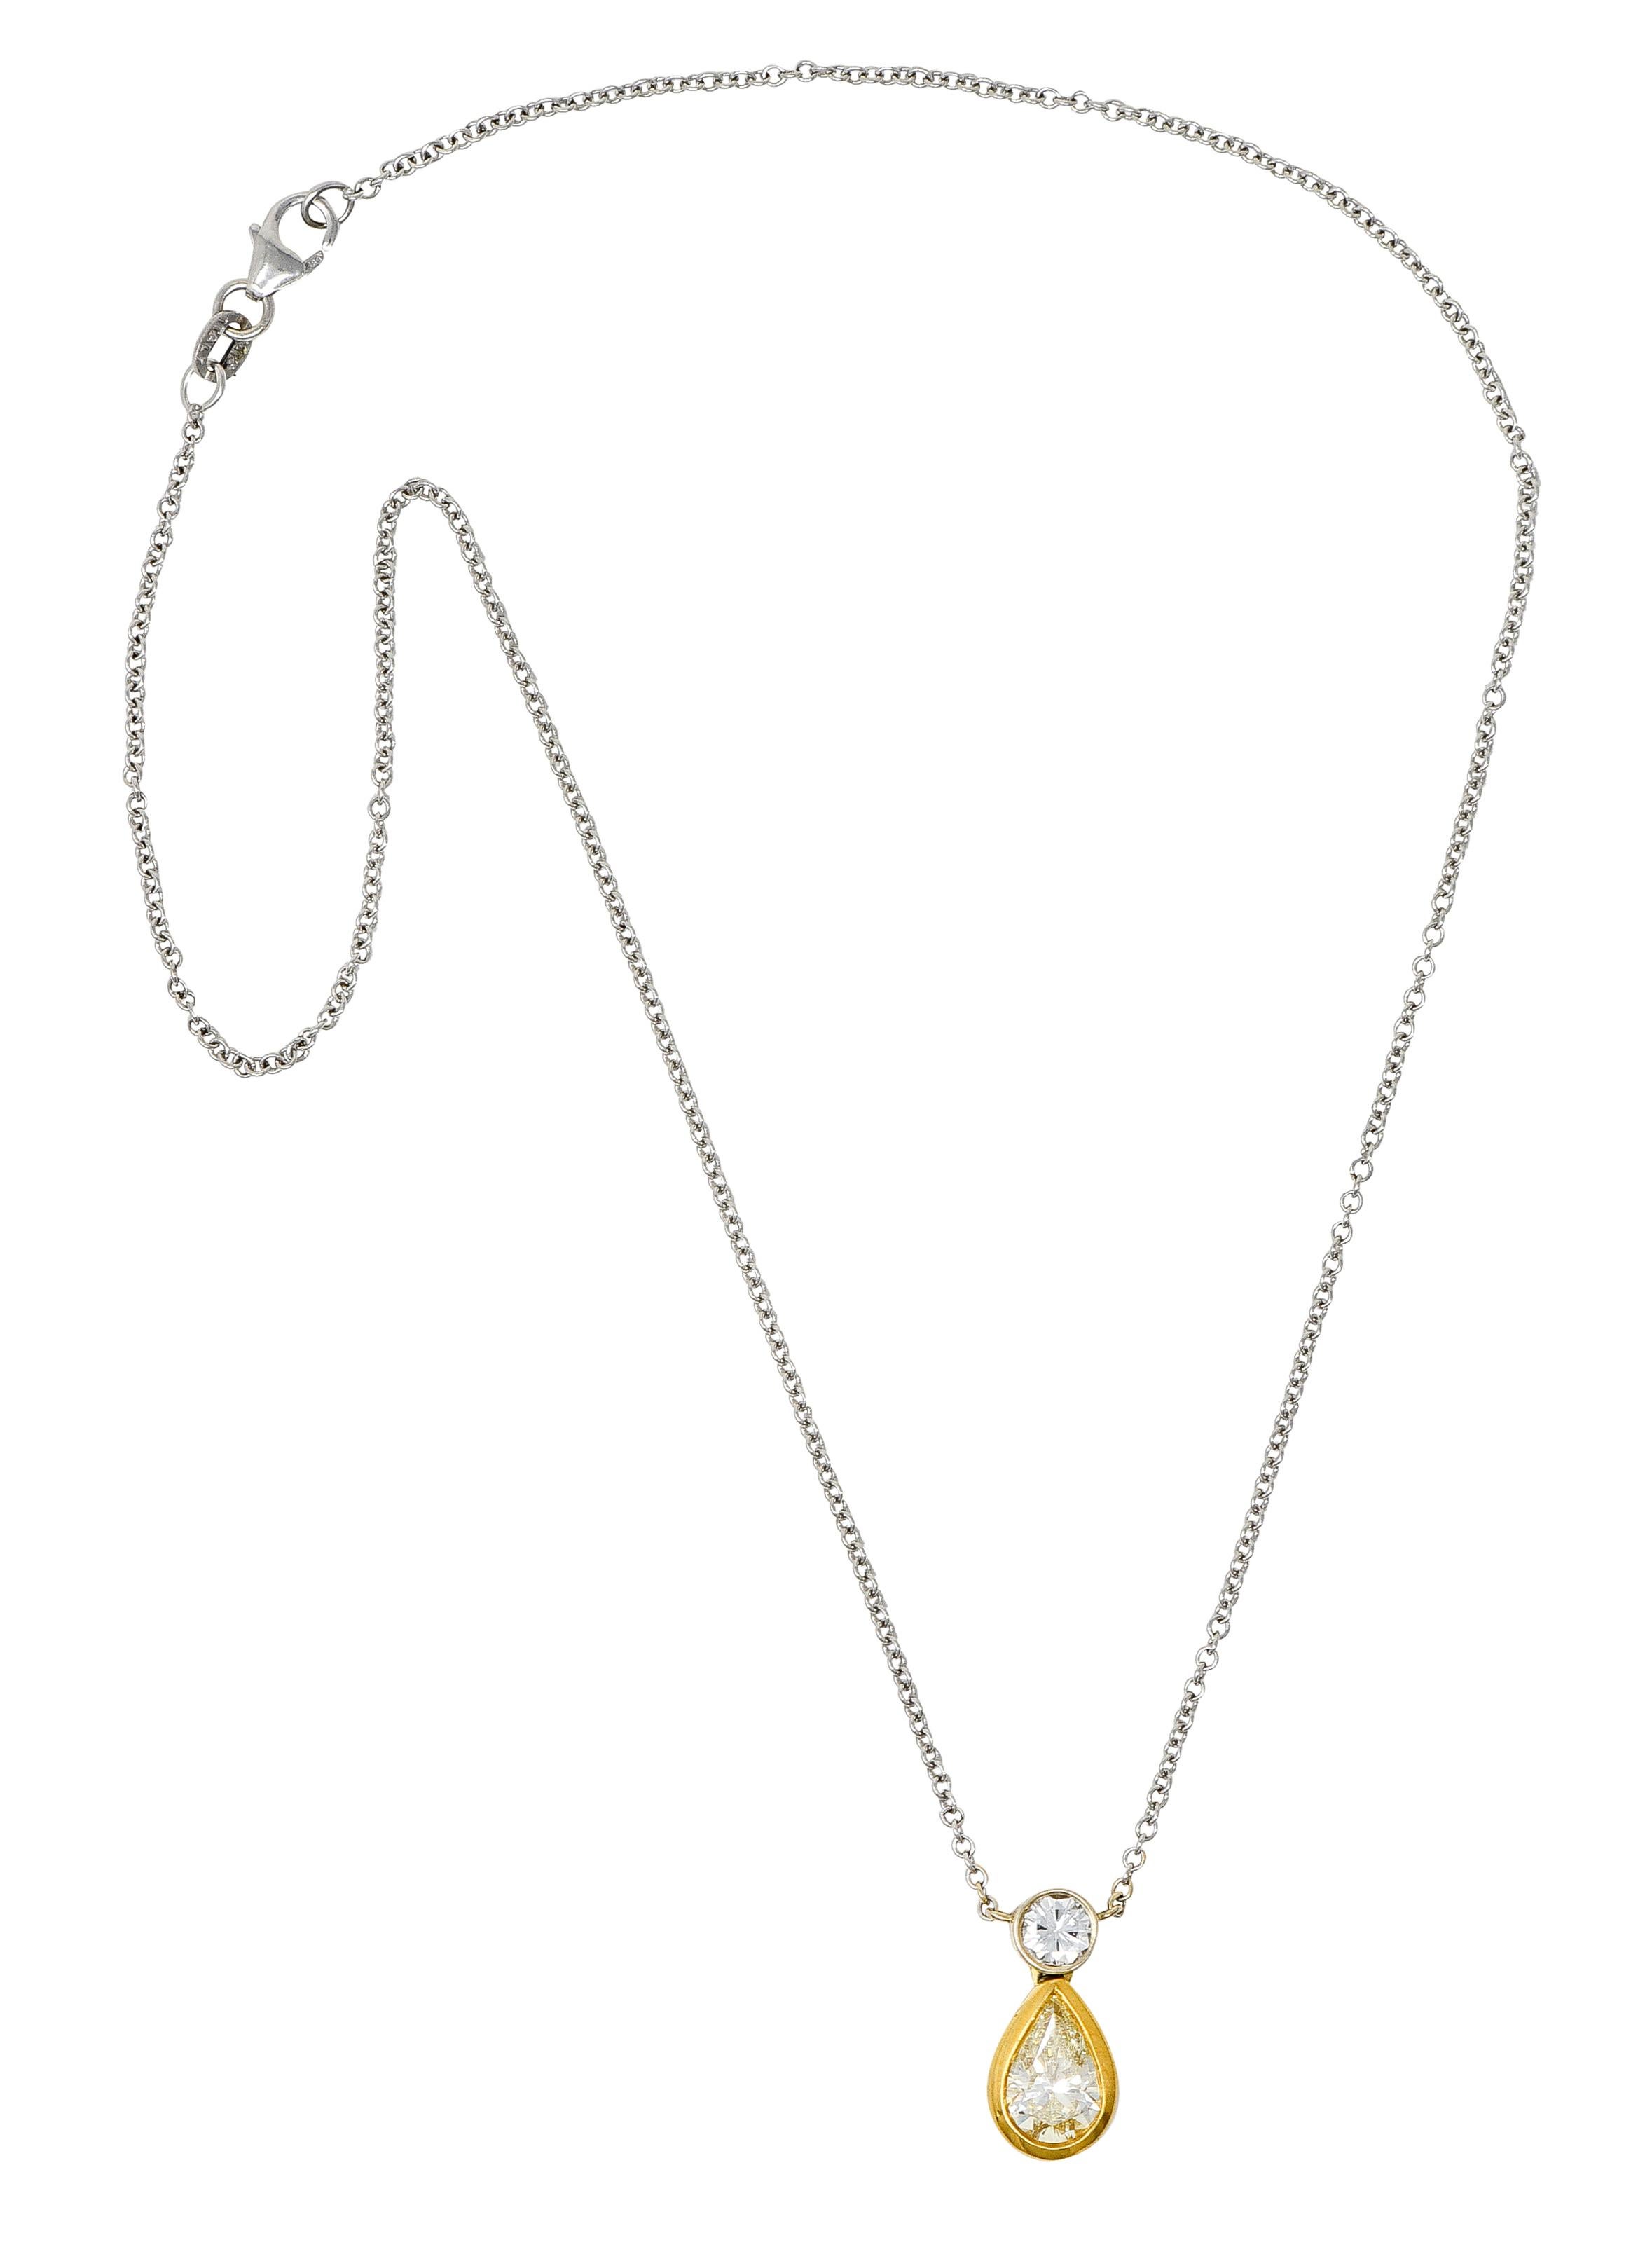 Cable chain necklace centers a fixed diamond drop station. Surmount is a round brilliant cut diamond set in white gold. Weighing approximately 0.40 carat with H color and SI2 clarity. With an articulated drop featuring a pear cut light fancy yellow